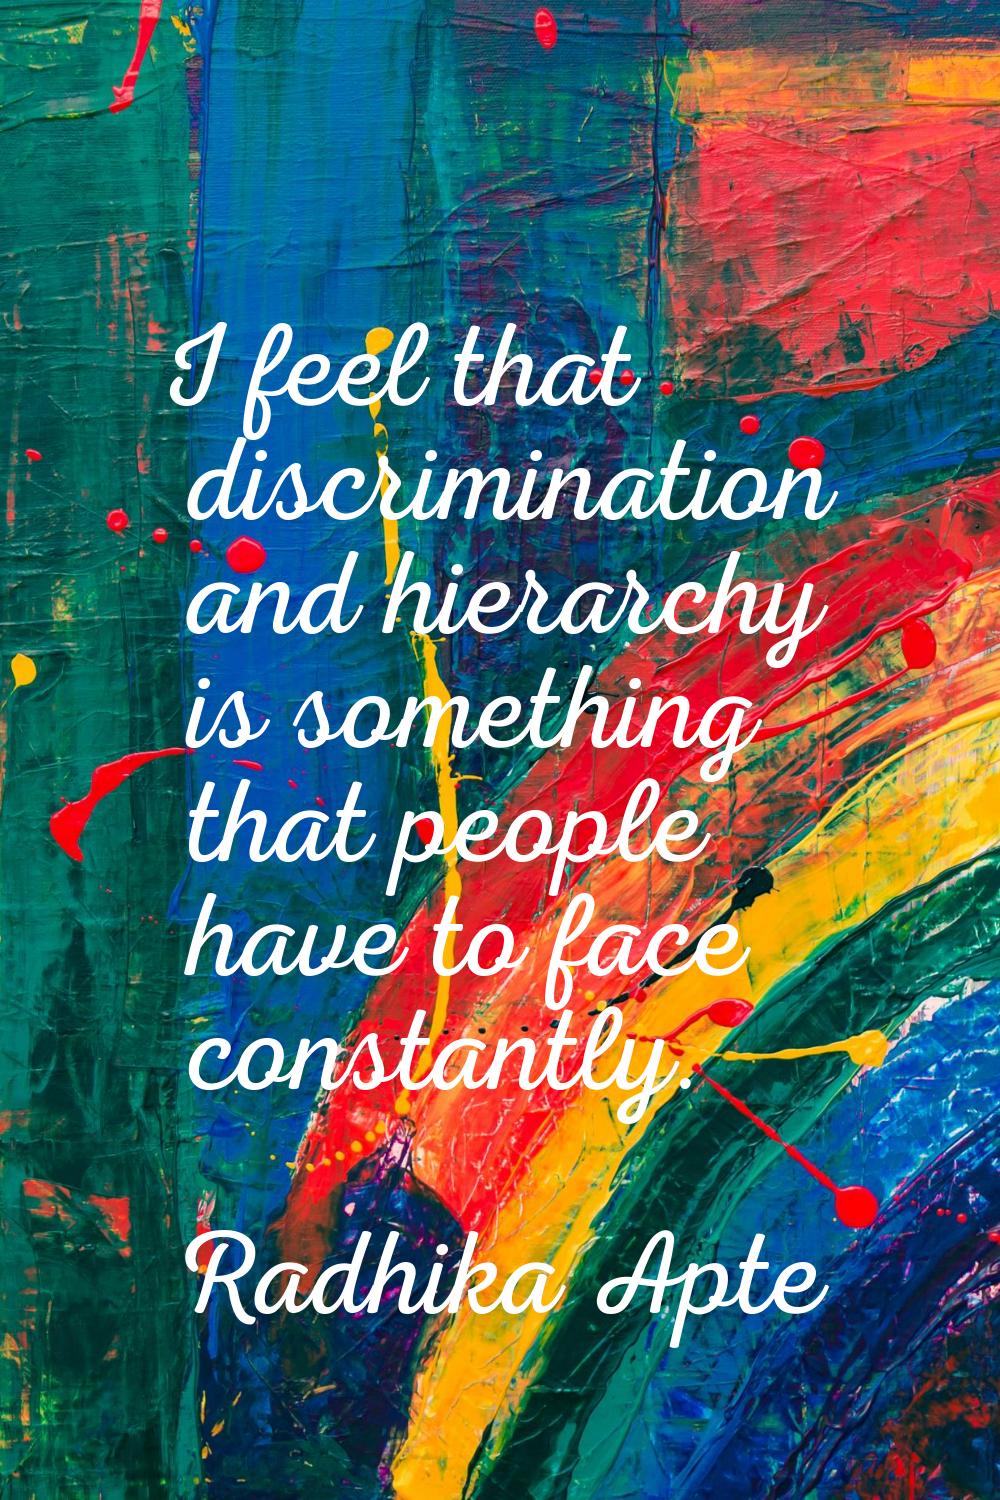 I feel that discrimination and hierarchy is something that people have to face constantly.